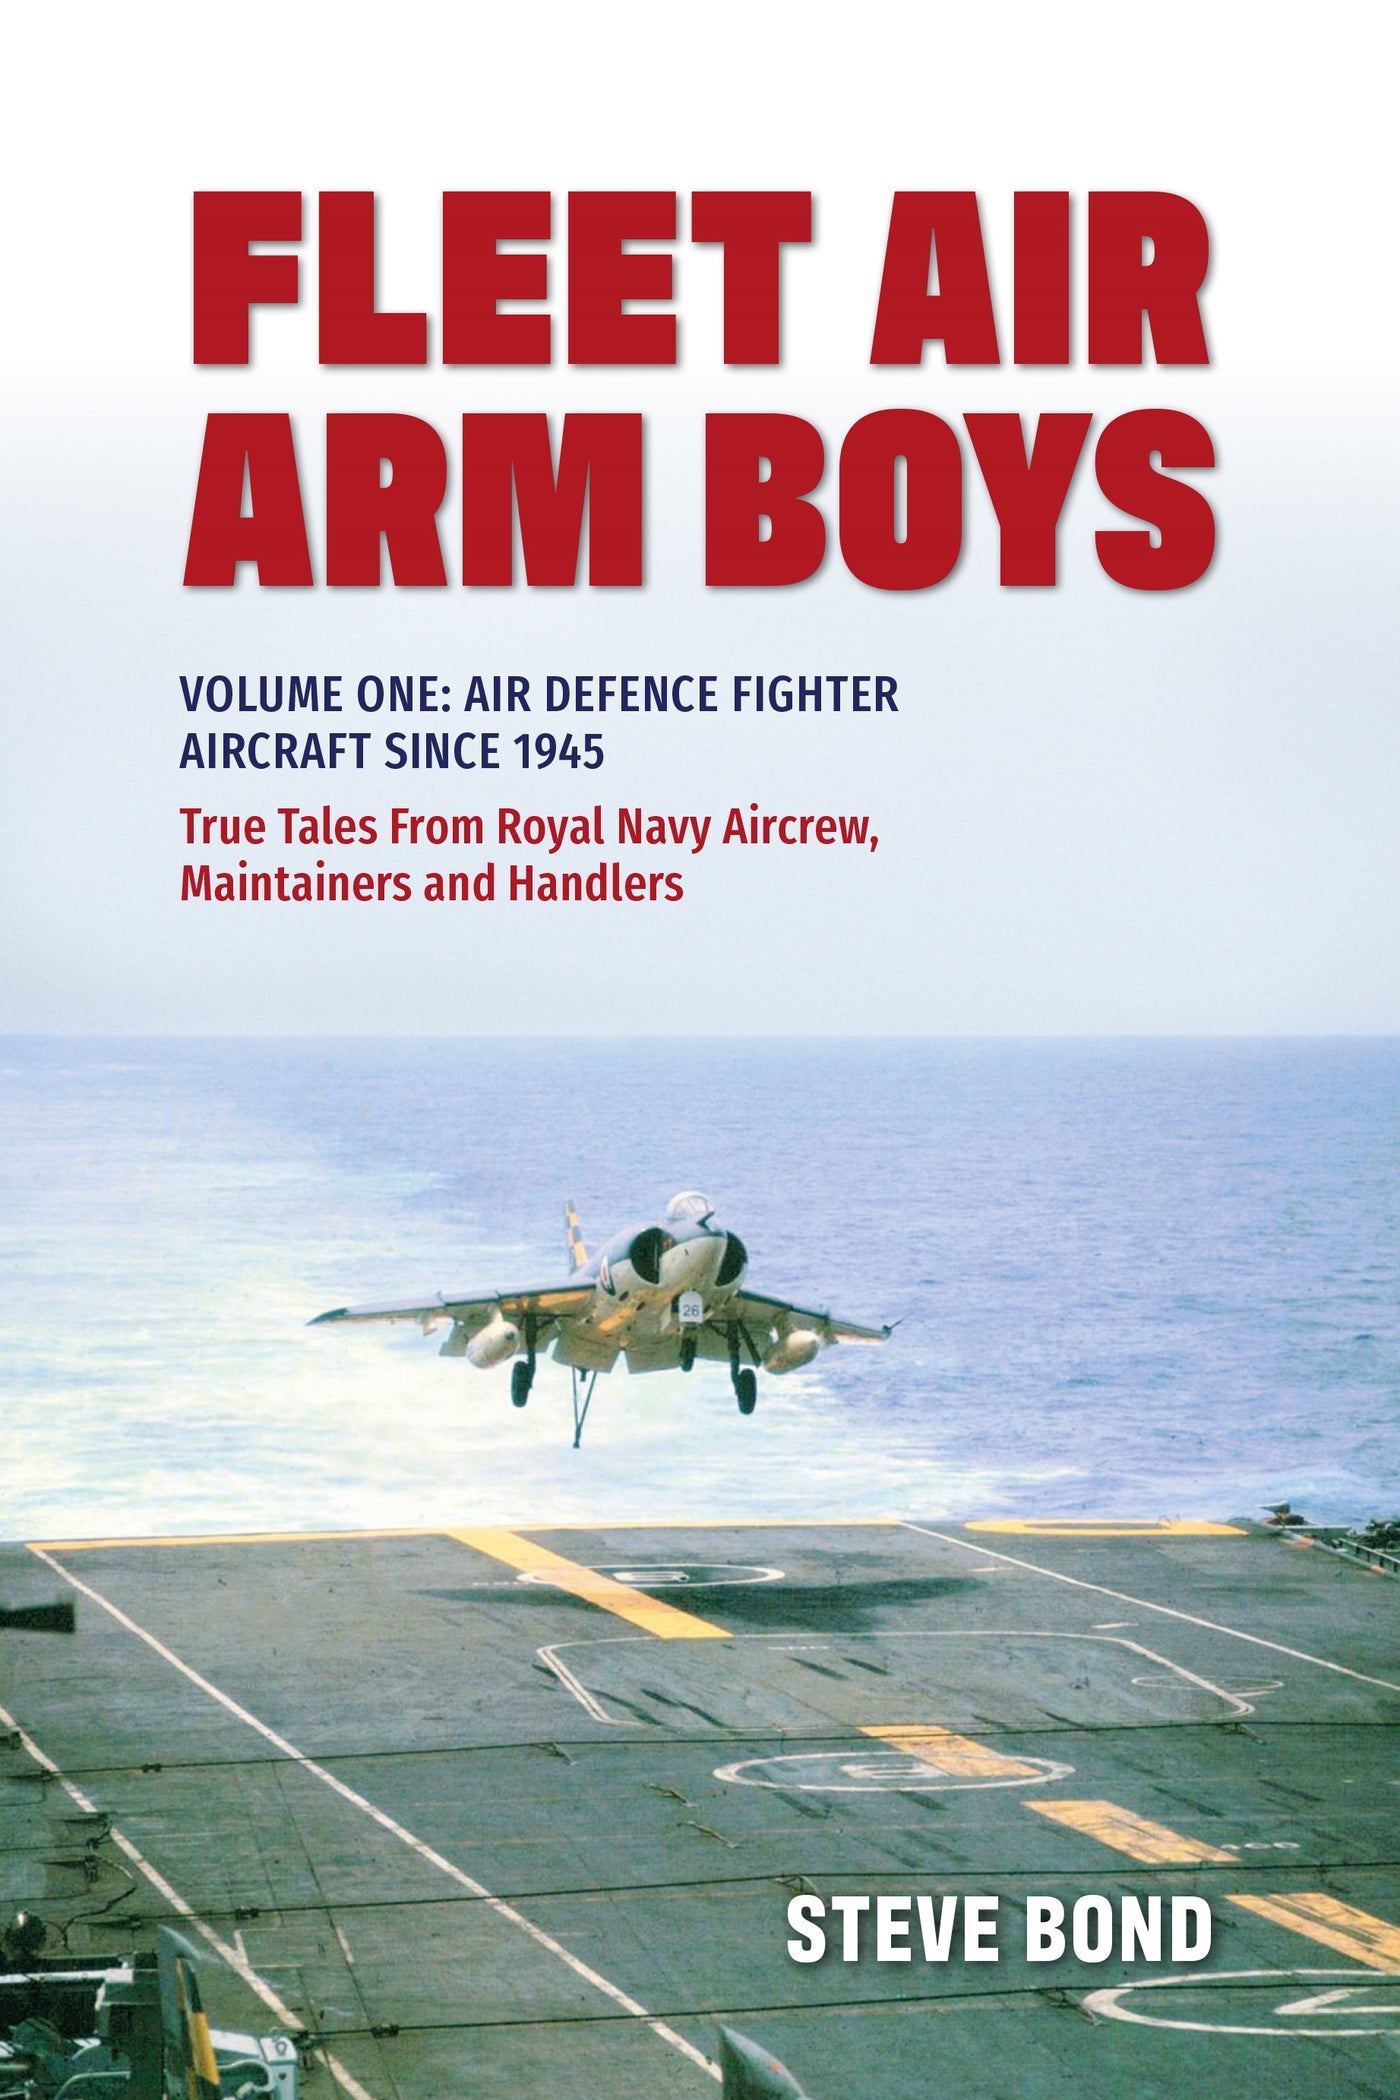 Fleet Air Arm Boys: True Tales from Royal Navy Aircrew, Maintainers and Handlers